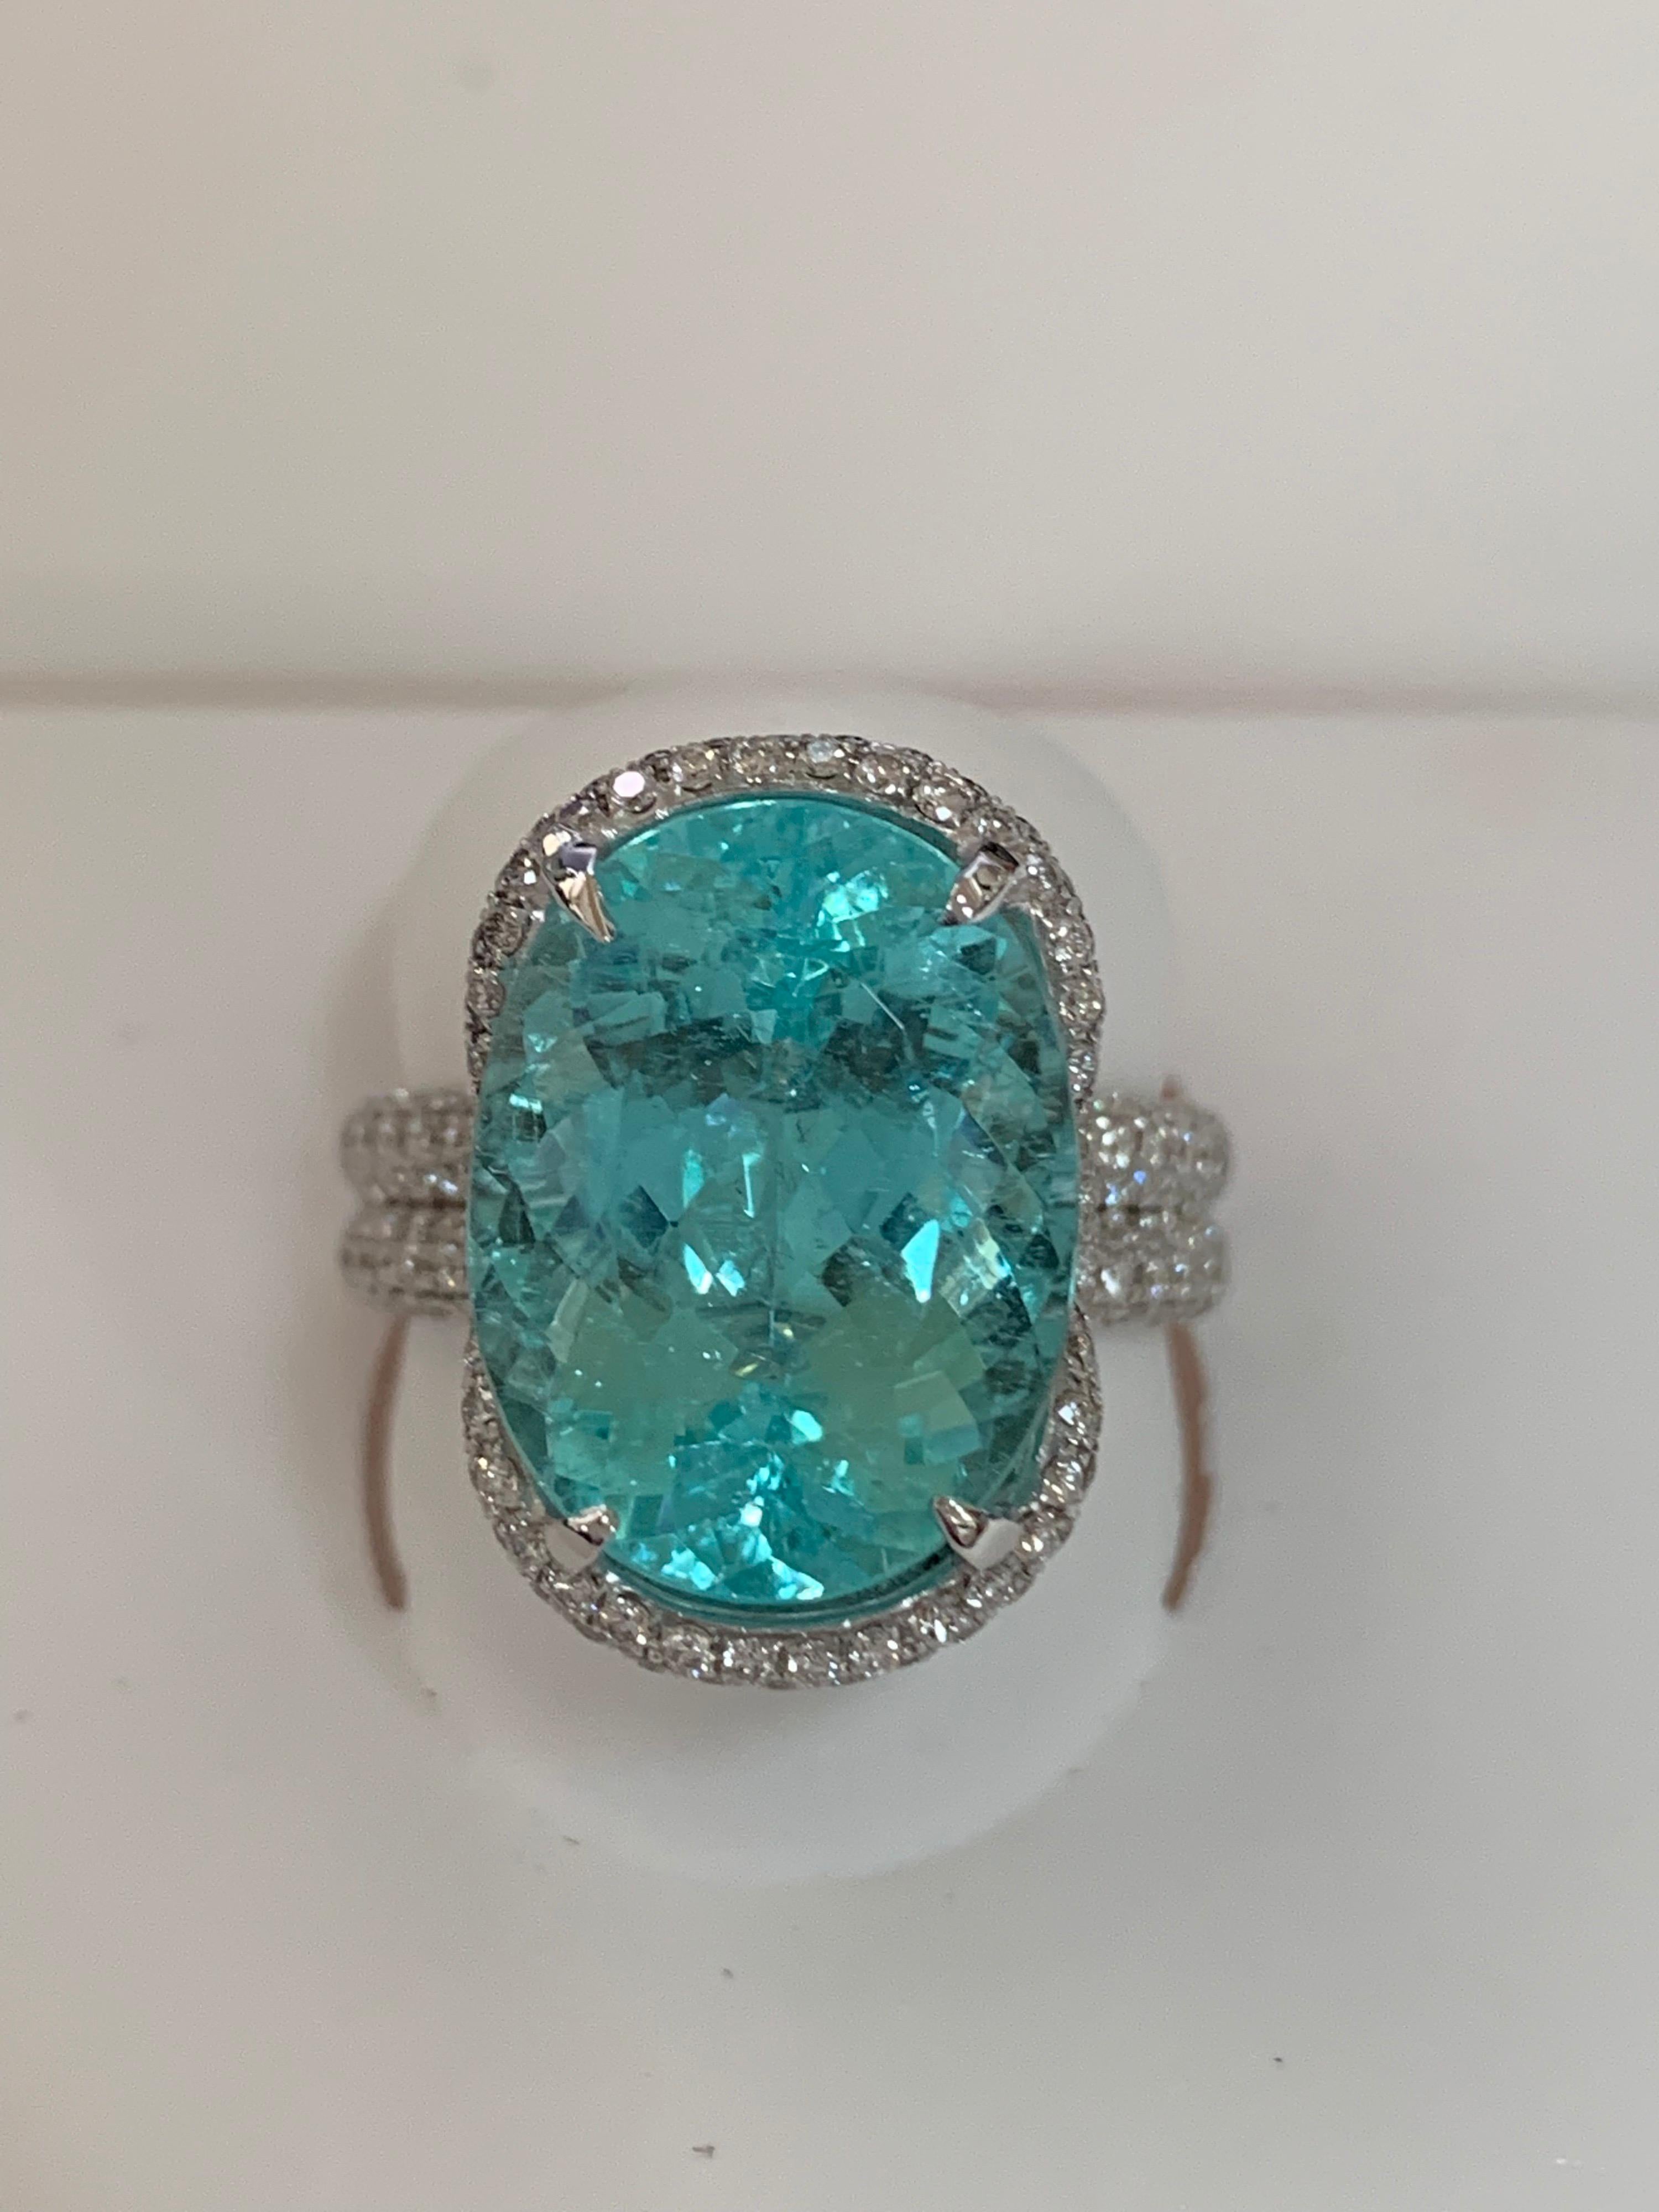 Oval natural 11.53 Carat Paraiba Tourmaline and white round 1.60 Carat diamond set in 18 Karat gold is one of a kind handcrafted ring.
The ring is size 8 but can be resized if needed.